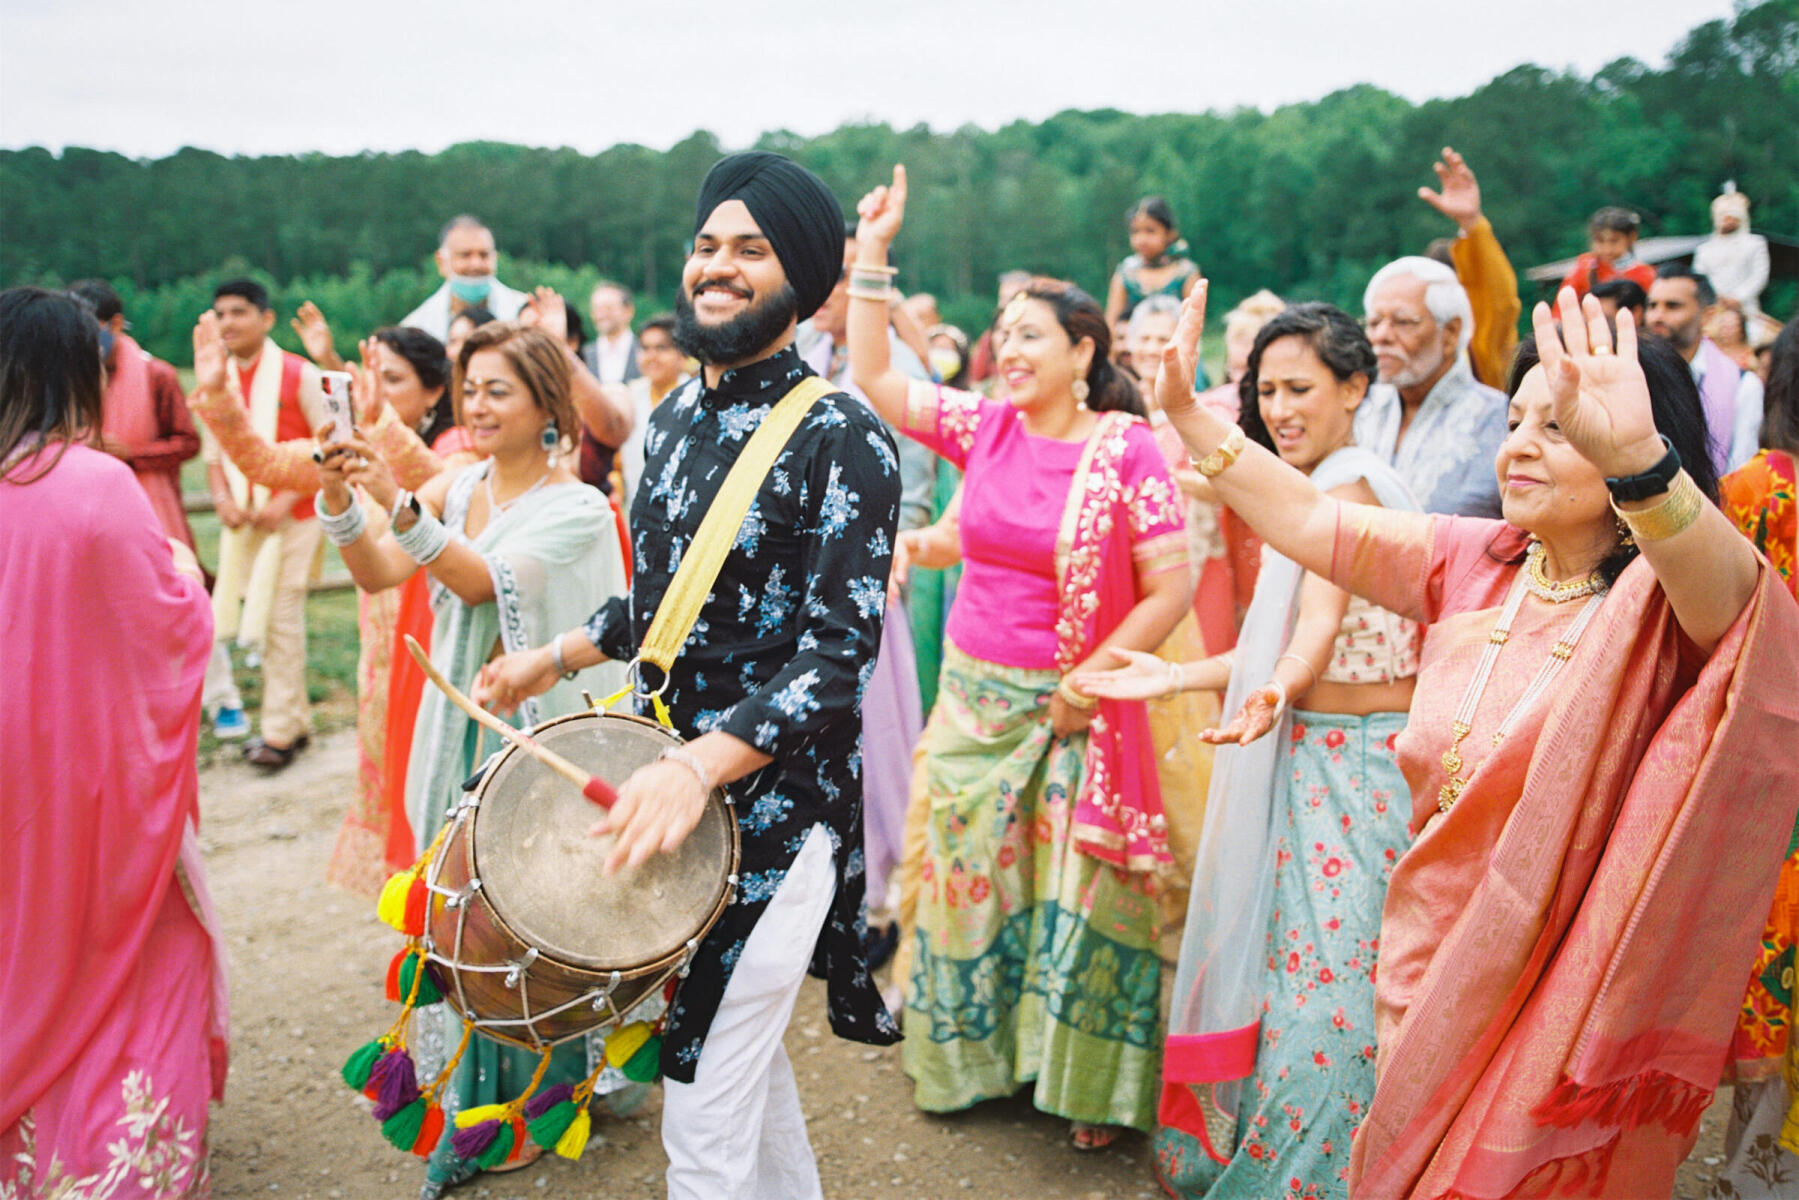 A lively baraat kicked off the wedding day during a weekend-long destination Indian wedding.